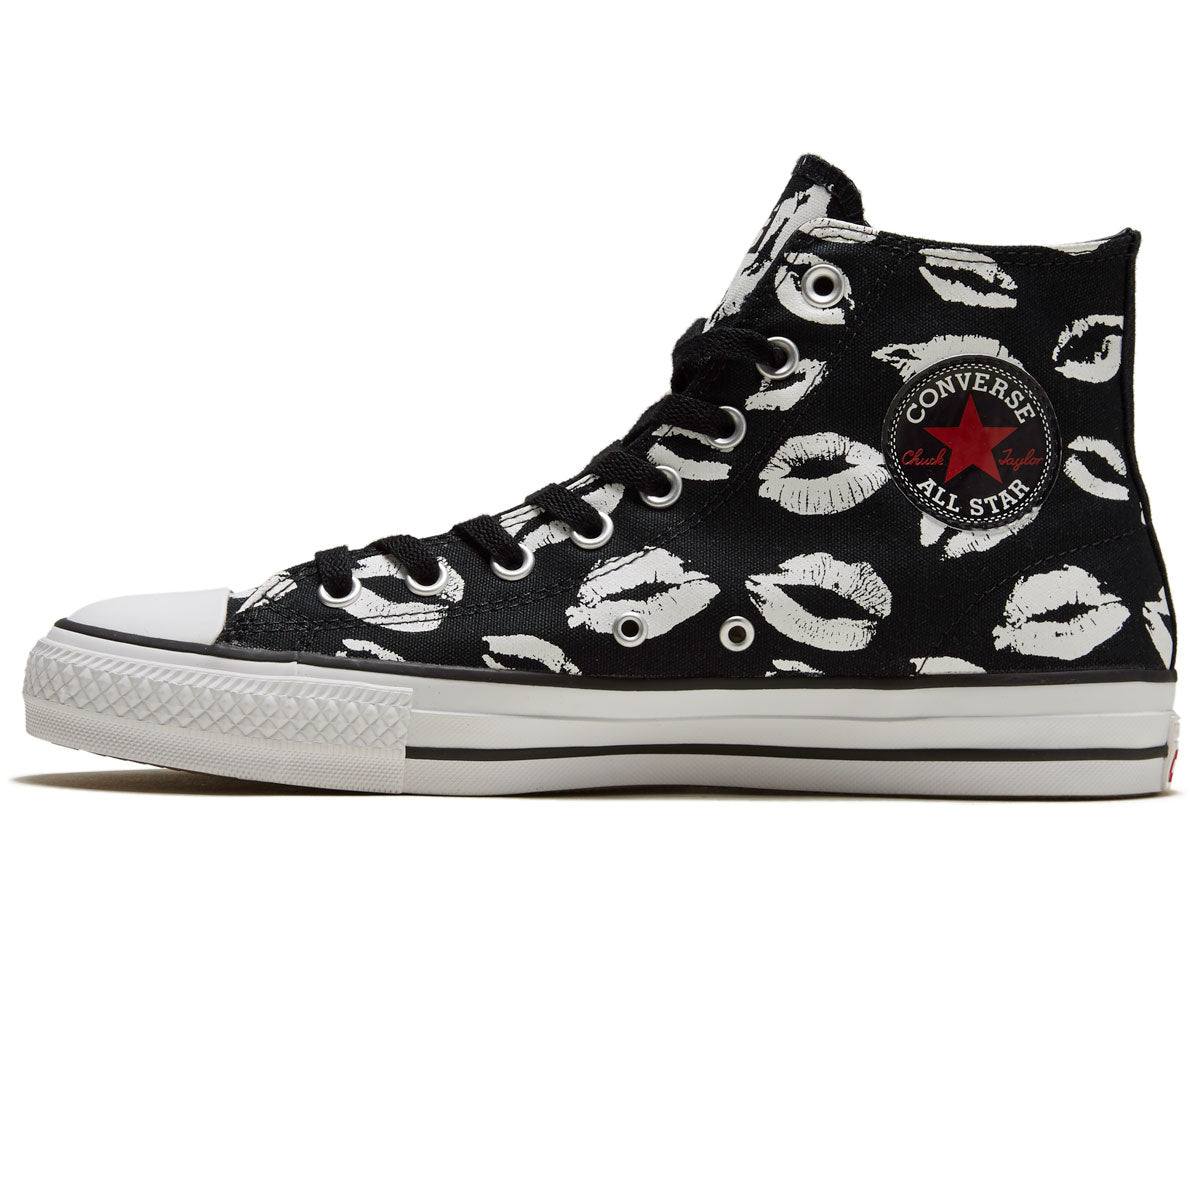 Converse Chuck Taylor All Star Pro Lips Hi Shoes - Black/White/Red – CCS